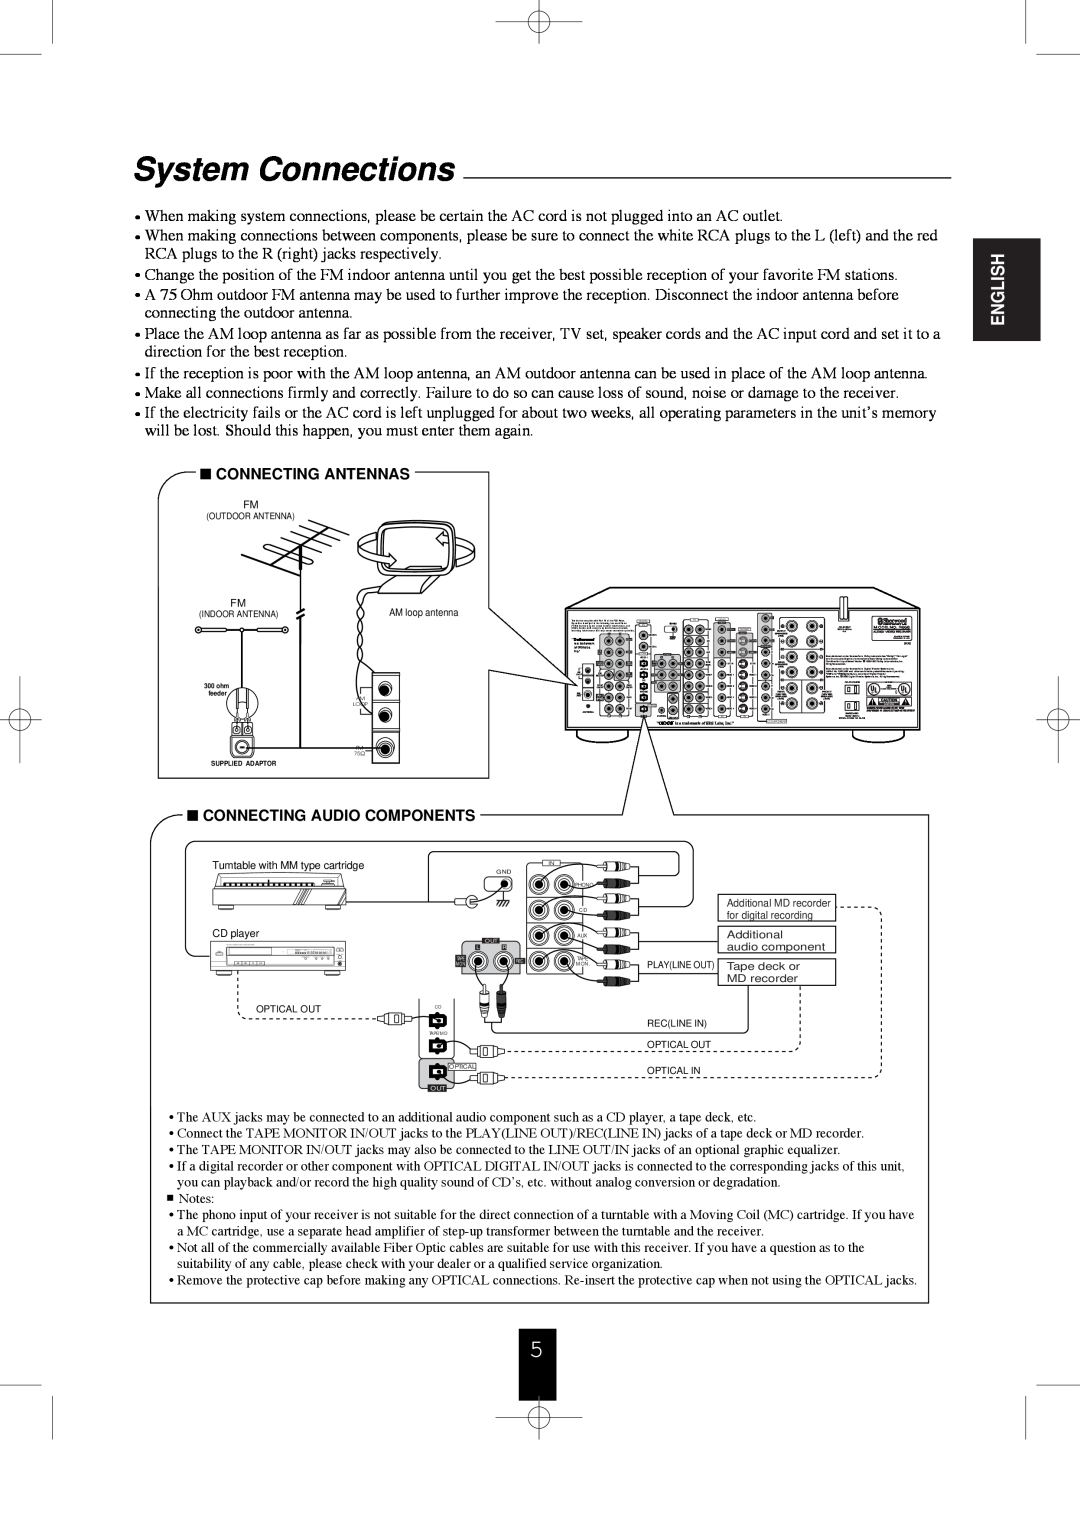 Sherwood R-956 manual System Connections, English, Connecting Antennas, Connecting Audio Components 